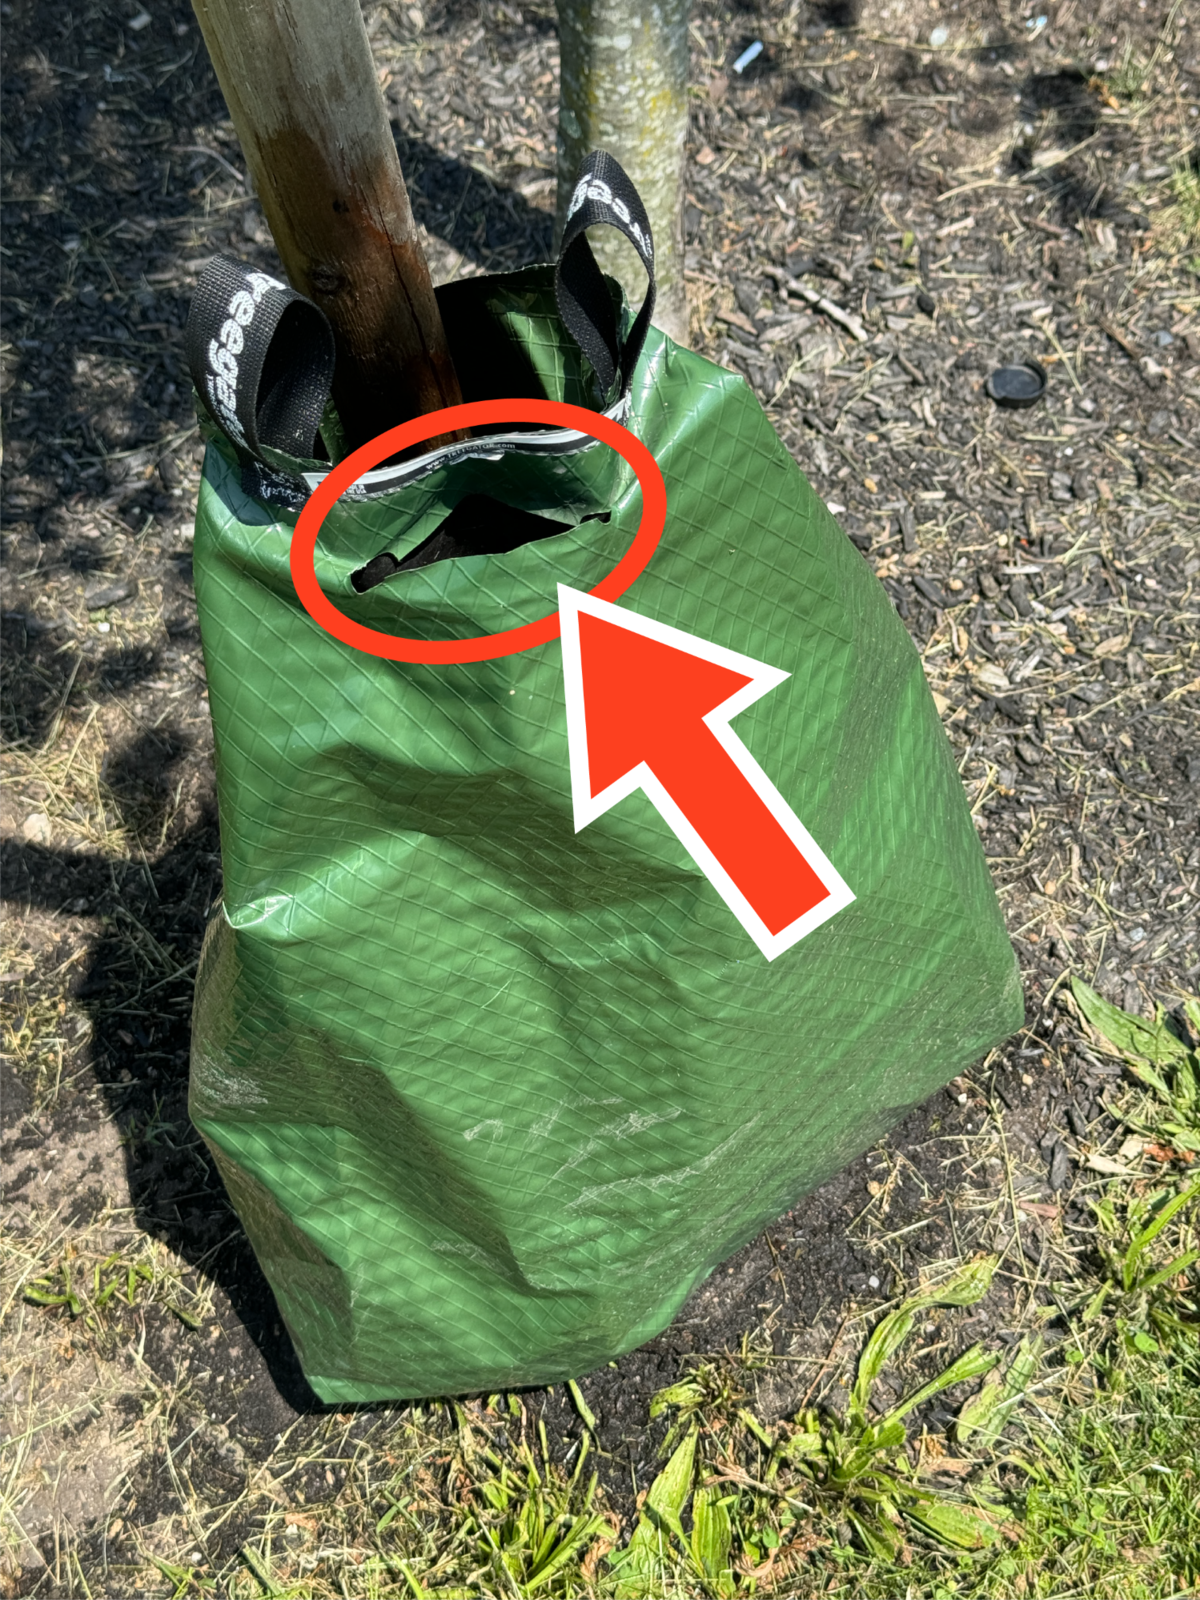 An arrow points to the opening of a watering bag with a circle for emphasis.